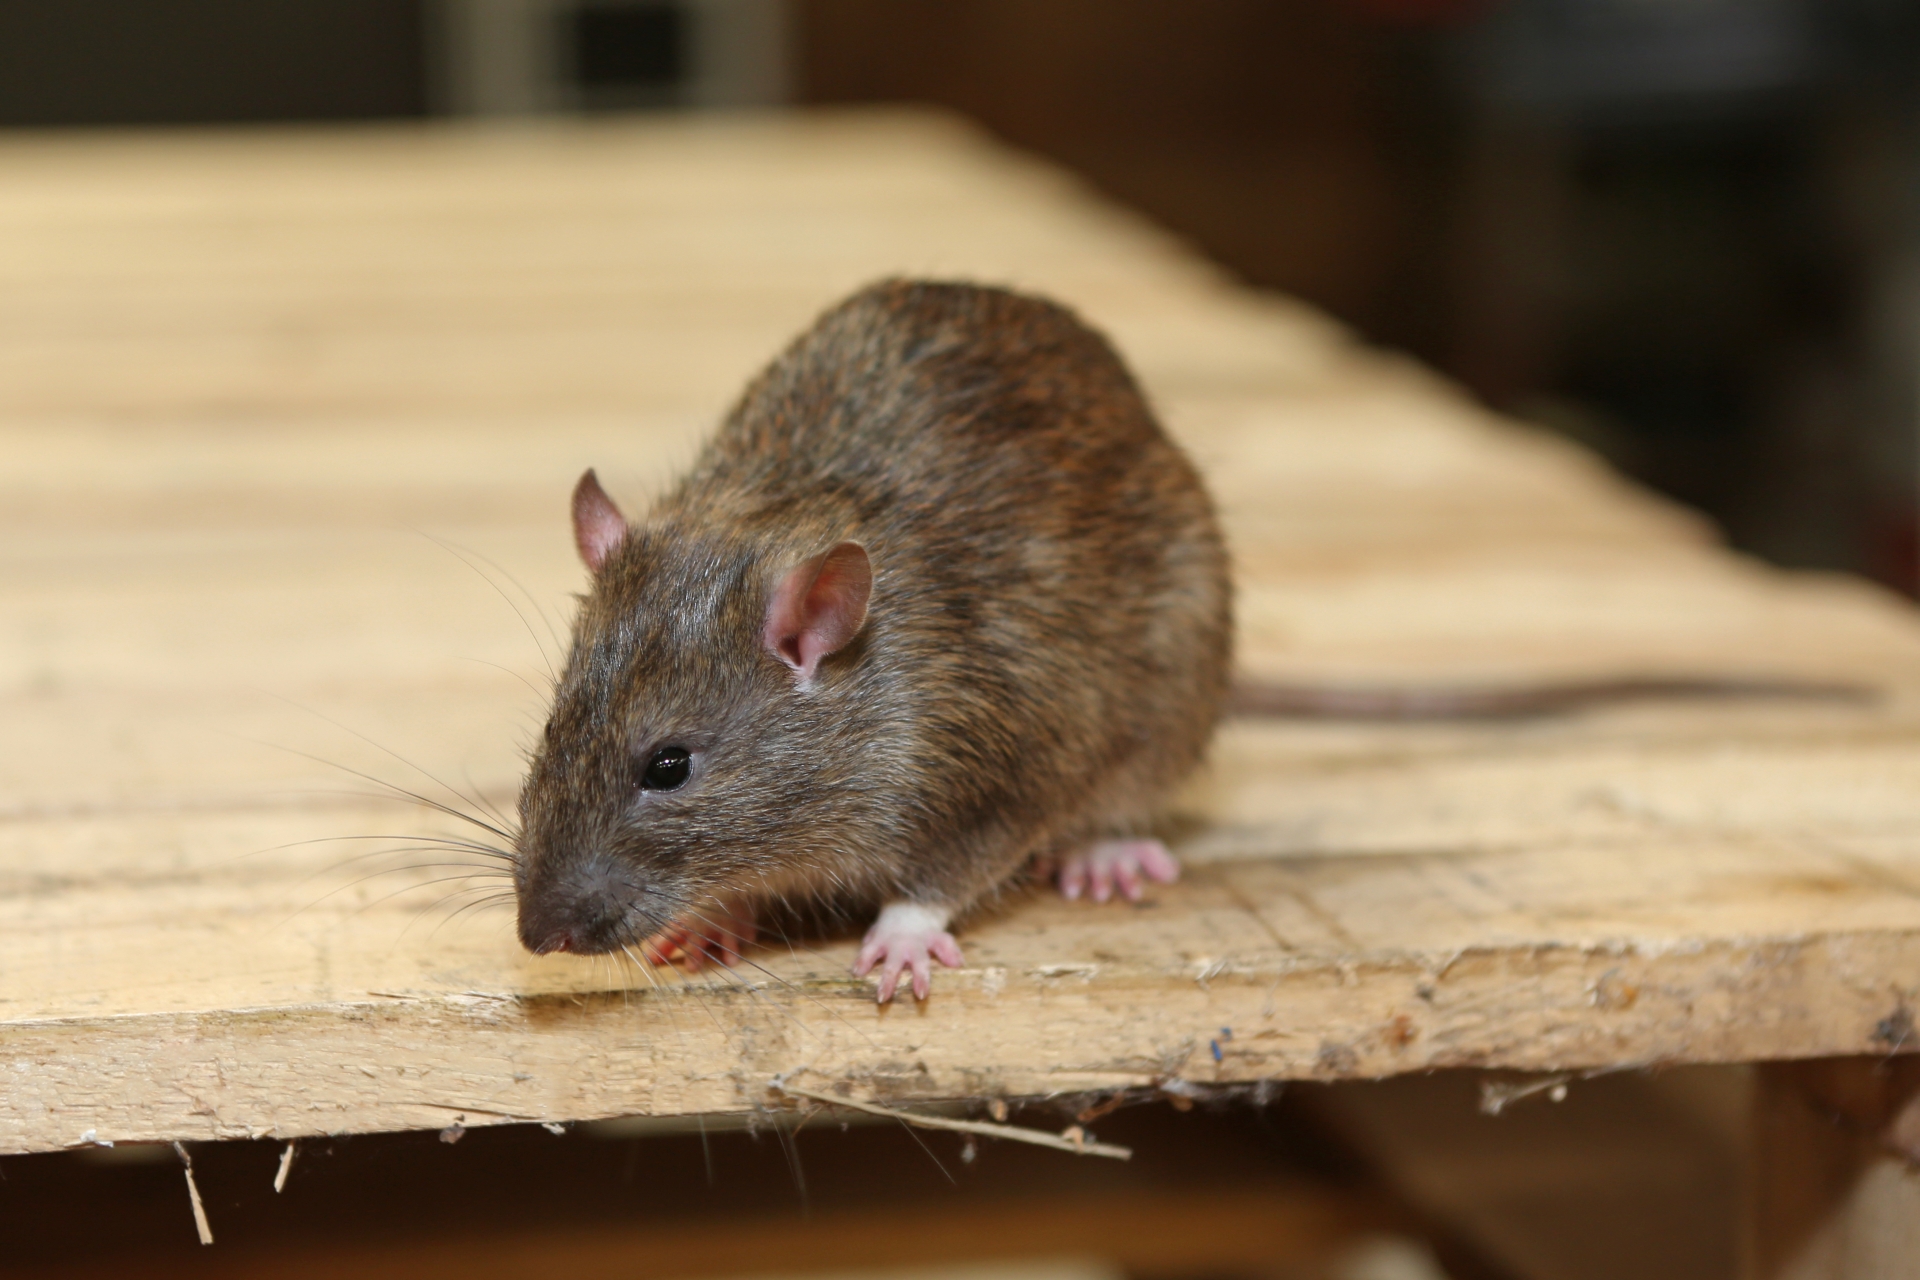 Rat extermination, Pest Control in Egham, Englefield Green, TW20. Call Now 020 8166 9746